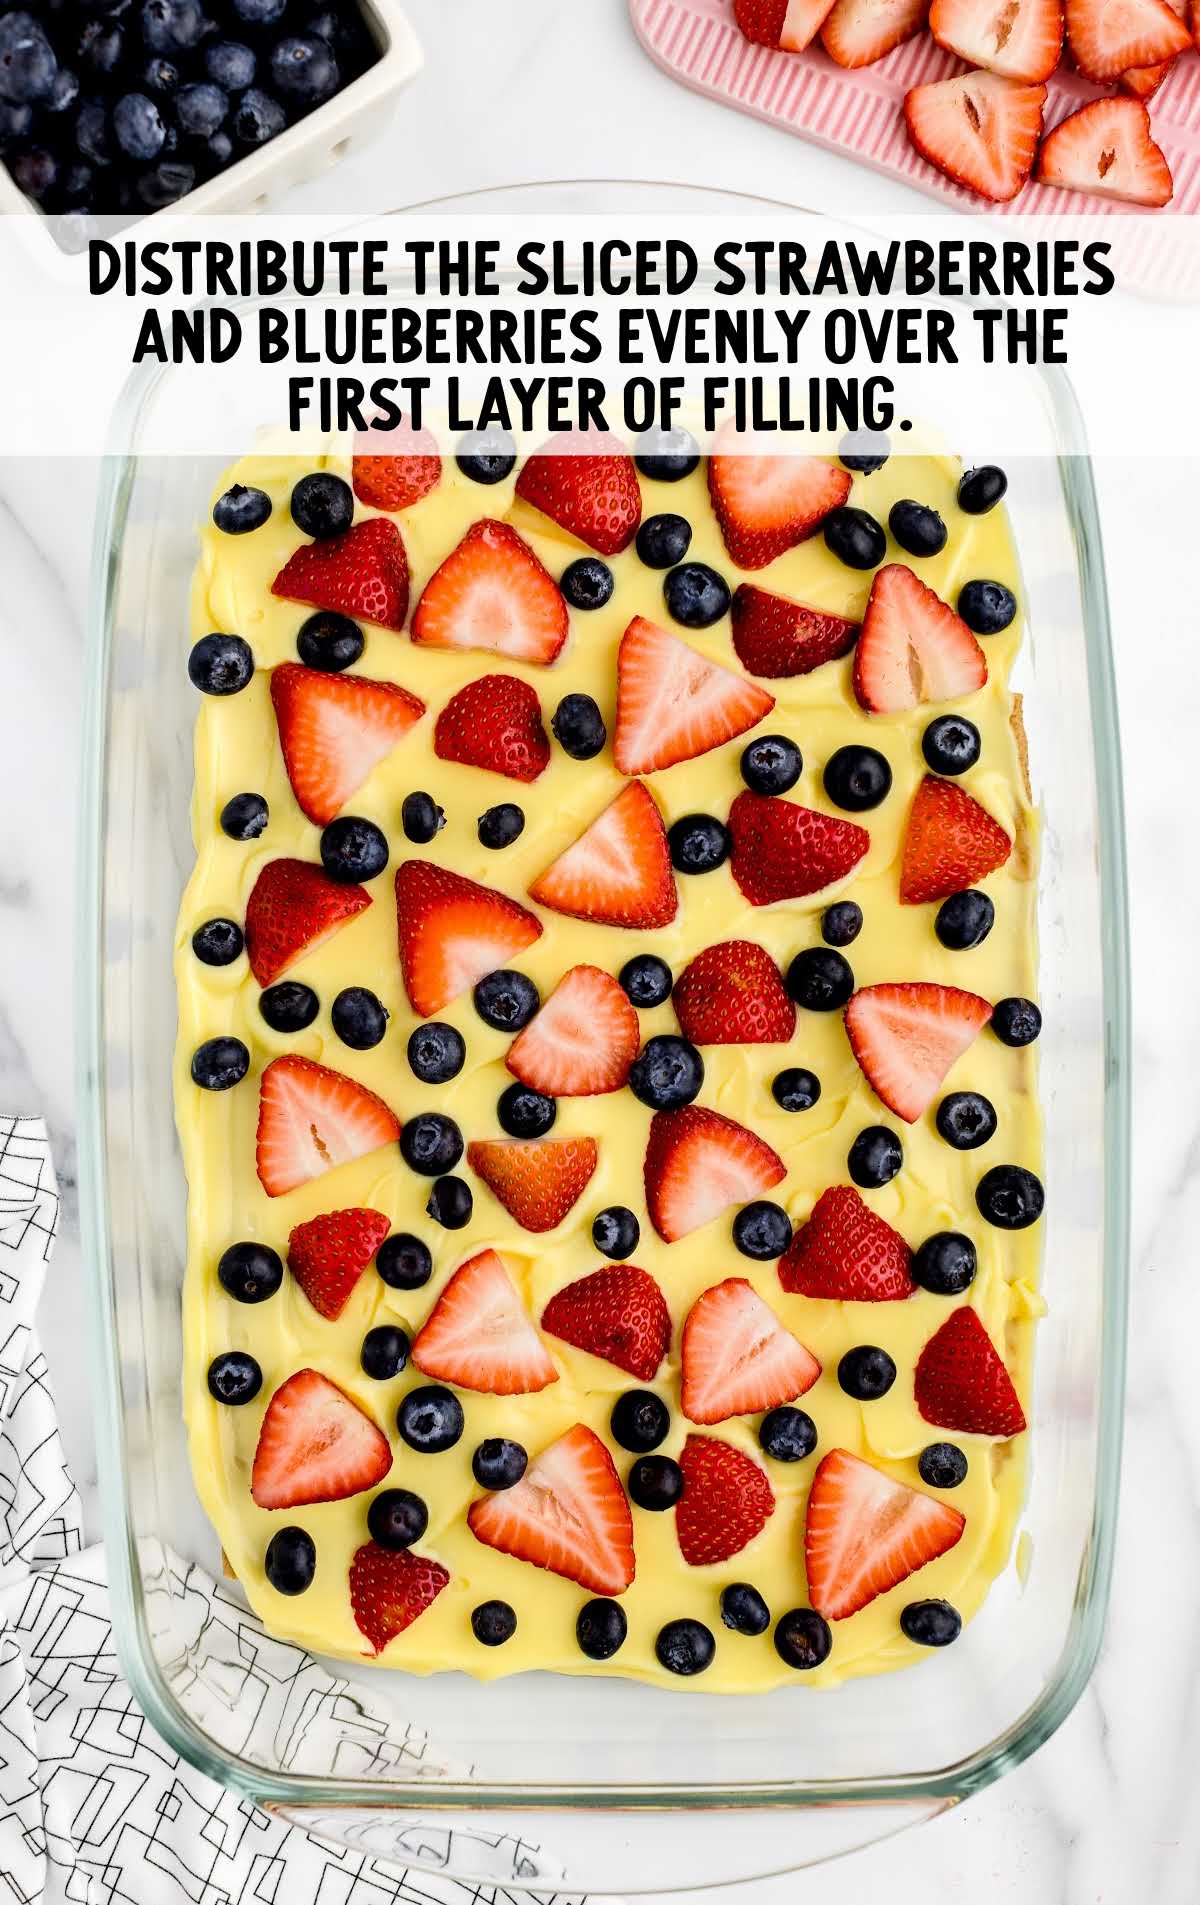 strawberries and blueberries distributed over the first layer of filling in a baking dish